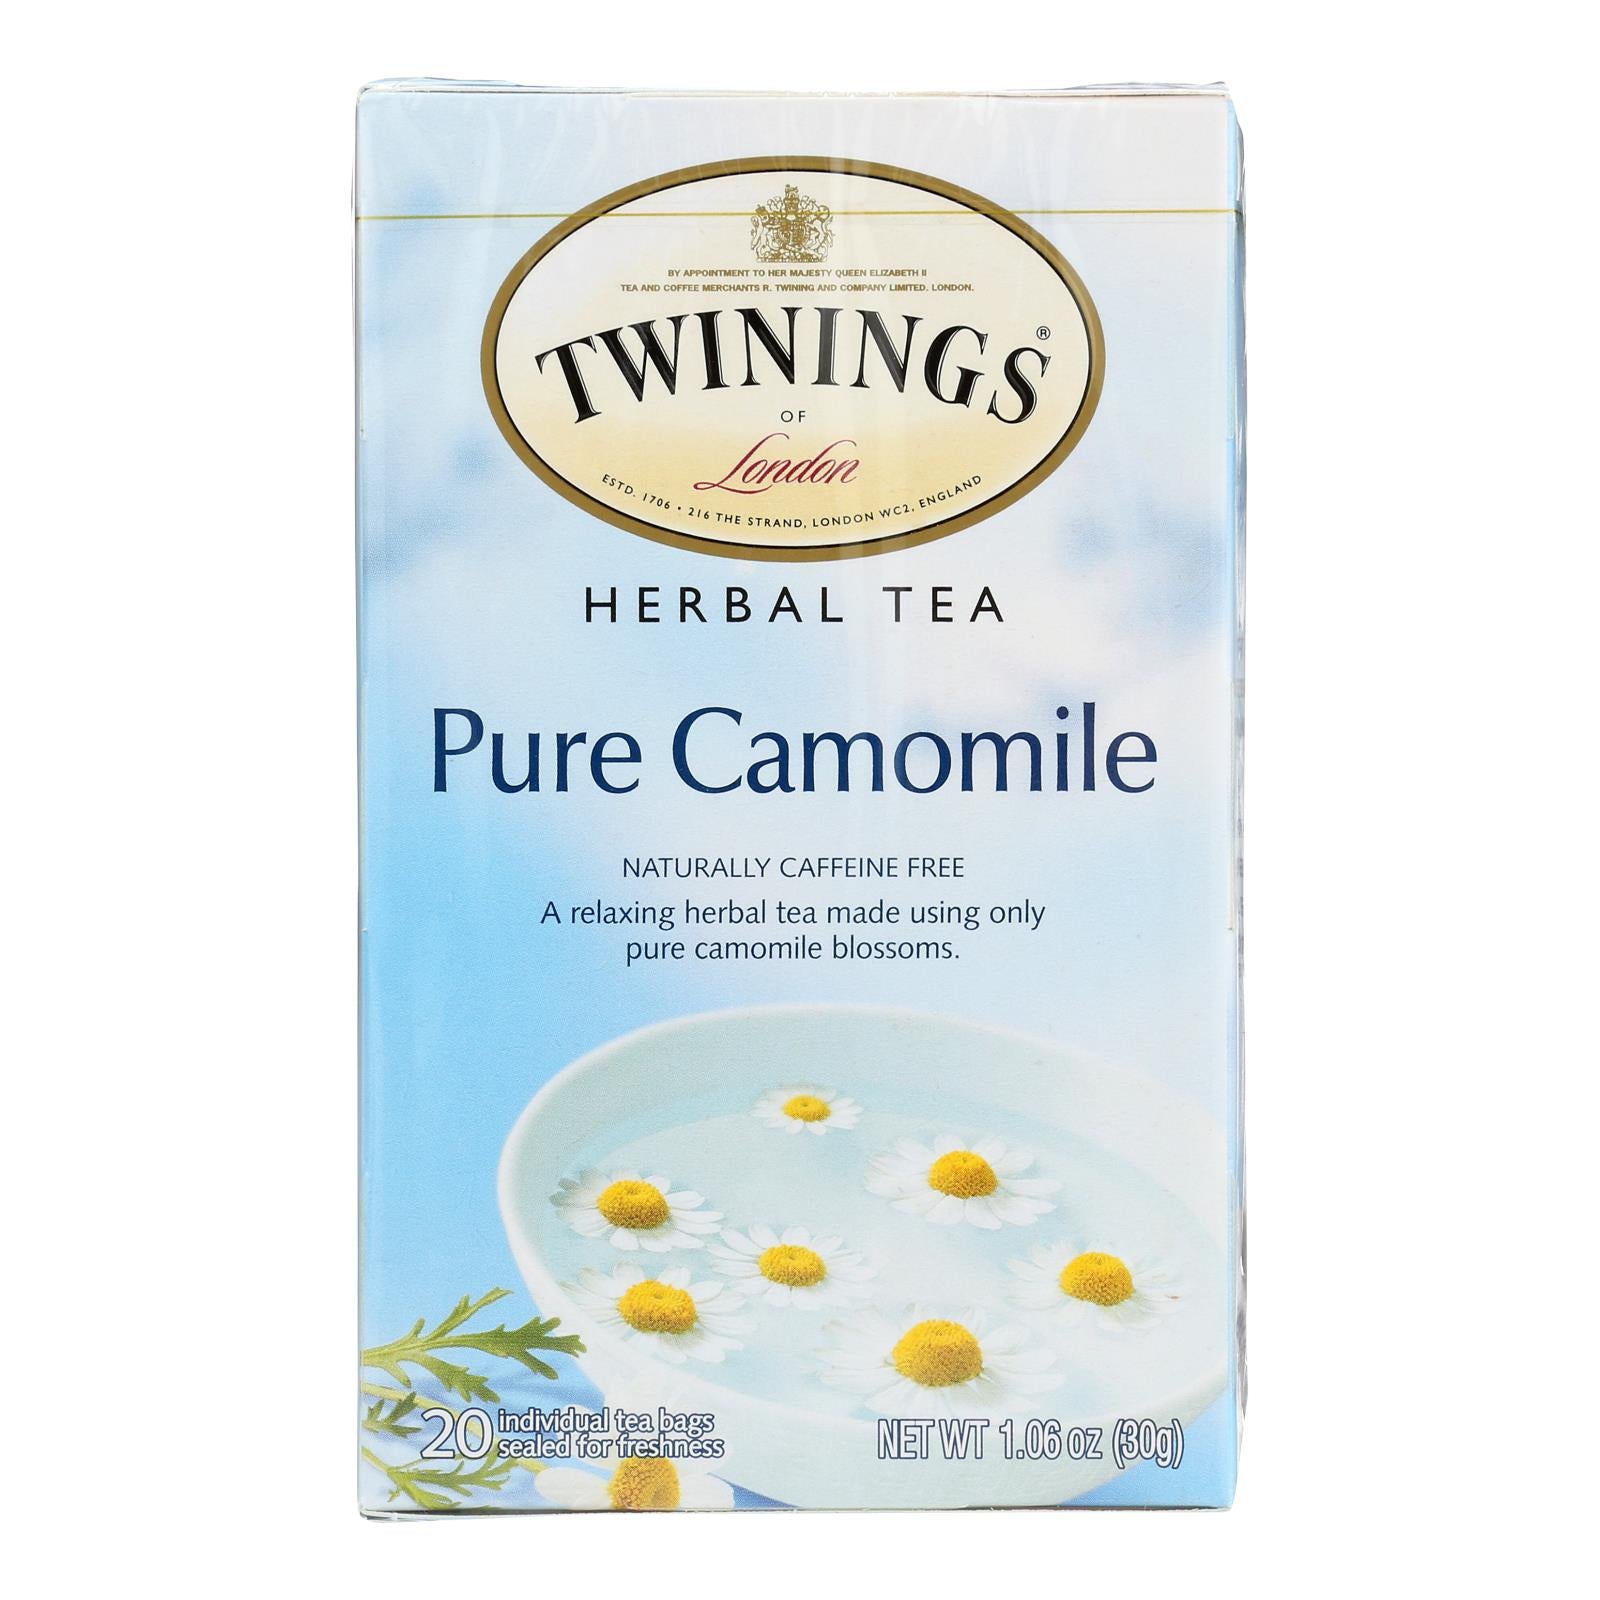 Twinings Tea Jacksons Of Piccadilly Tea - Pure Chamomile - Case Of 6 - 20 Bags